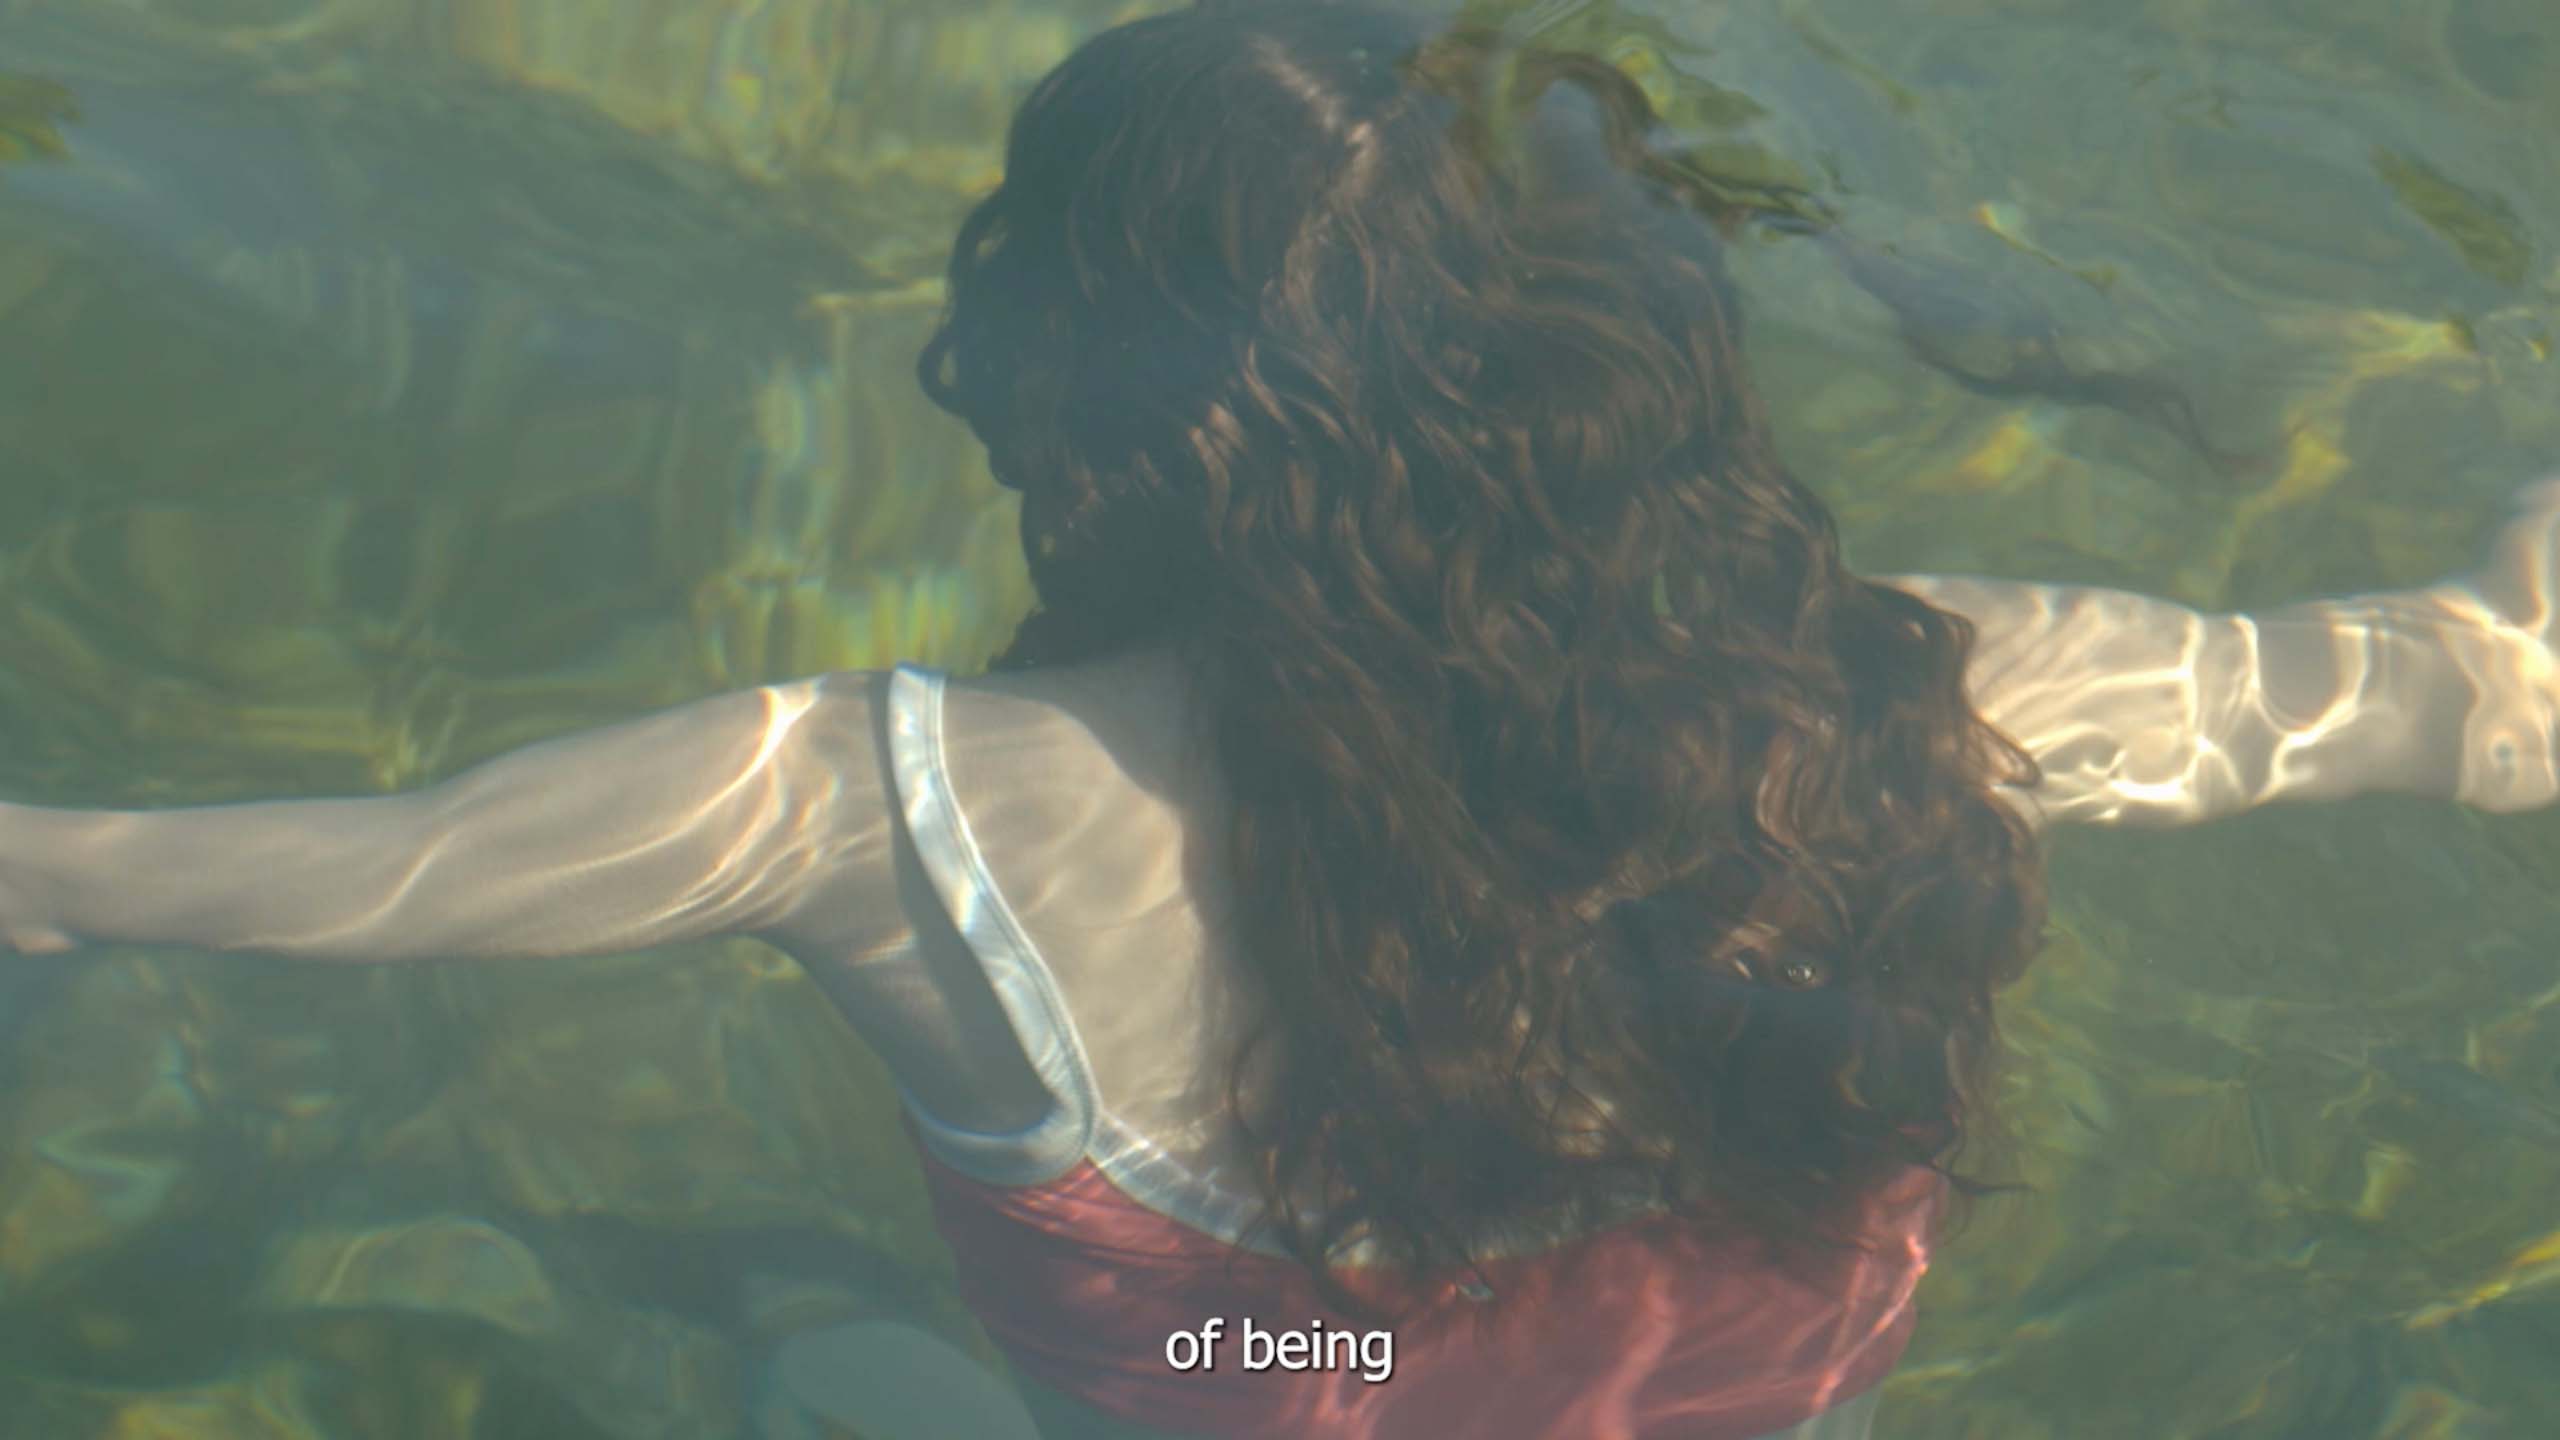 rosa floating in water with caption reading: of being